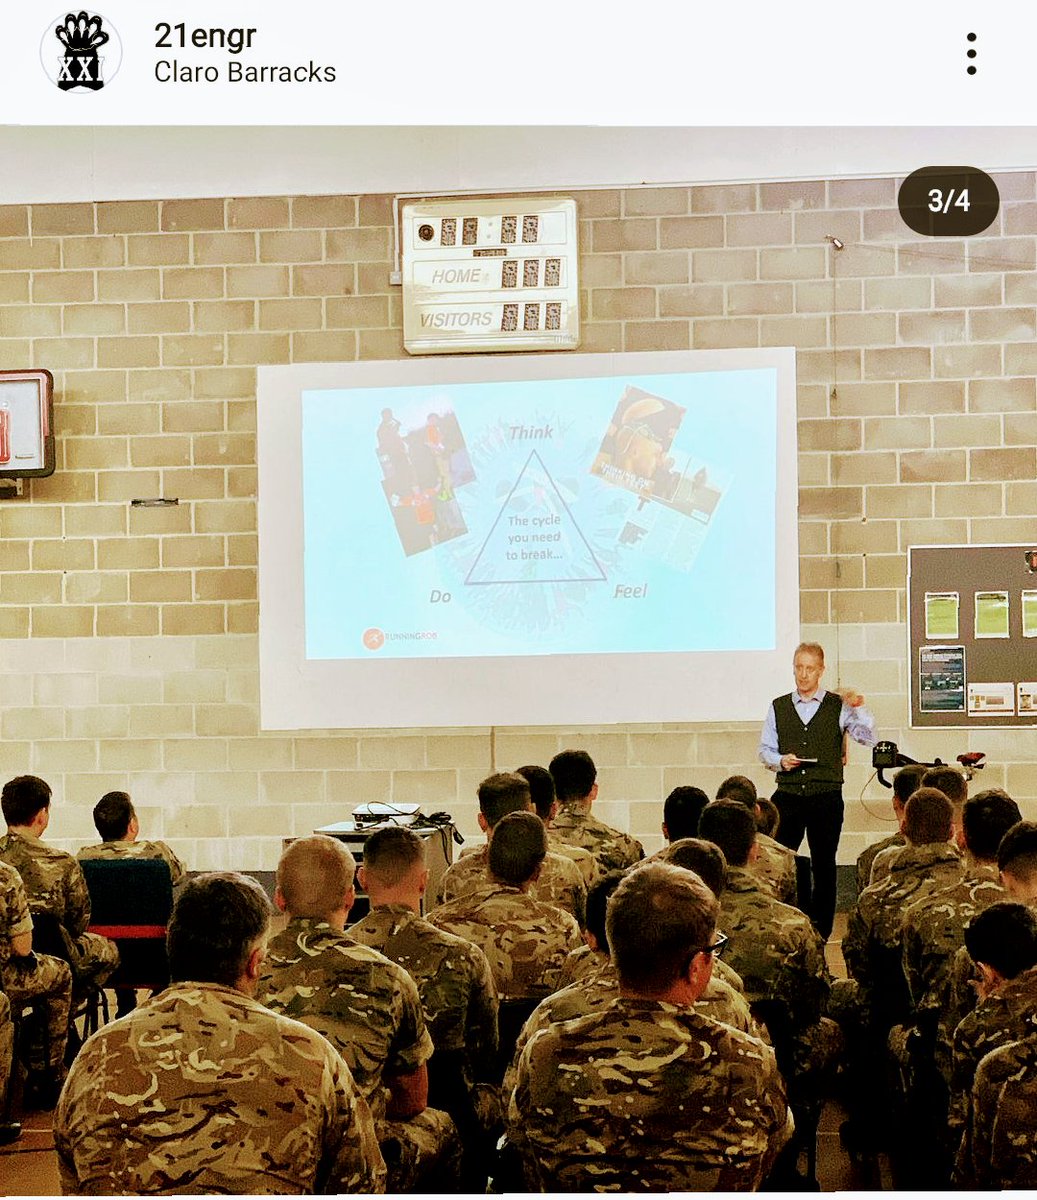 A friend of 20 years ago asked me to present on #MentalHealth to @21Engr today. A chance to mention #OpCourage as well.
instagram.com/p/CVA6XliIgRY/…

@NHSArmedForces @nickymurdochMBE @davidhopalong @VeteransGovUK @Official_REME @CORPSASM_1 @IJasonPhillips @LeoDochertyUK @Proud_Sappers